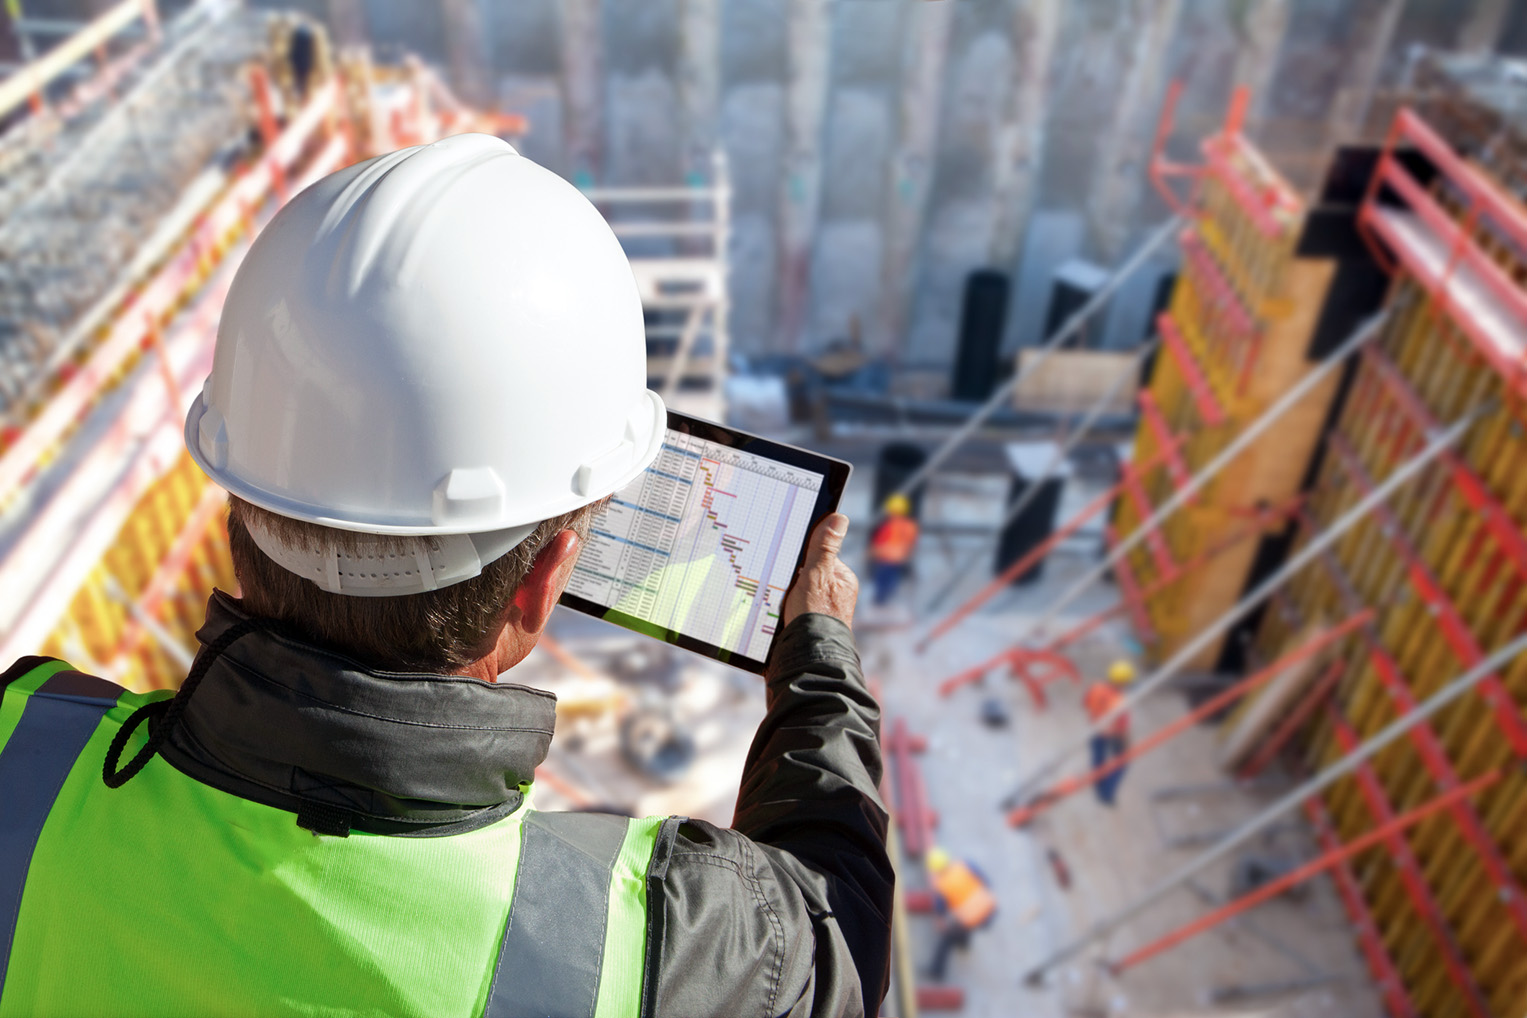 A construction worker reviewing project status on a tablet while overseeing a job site.